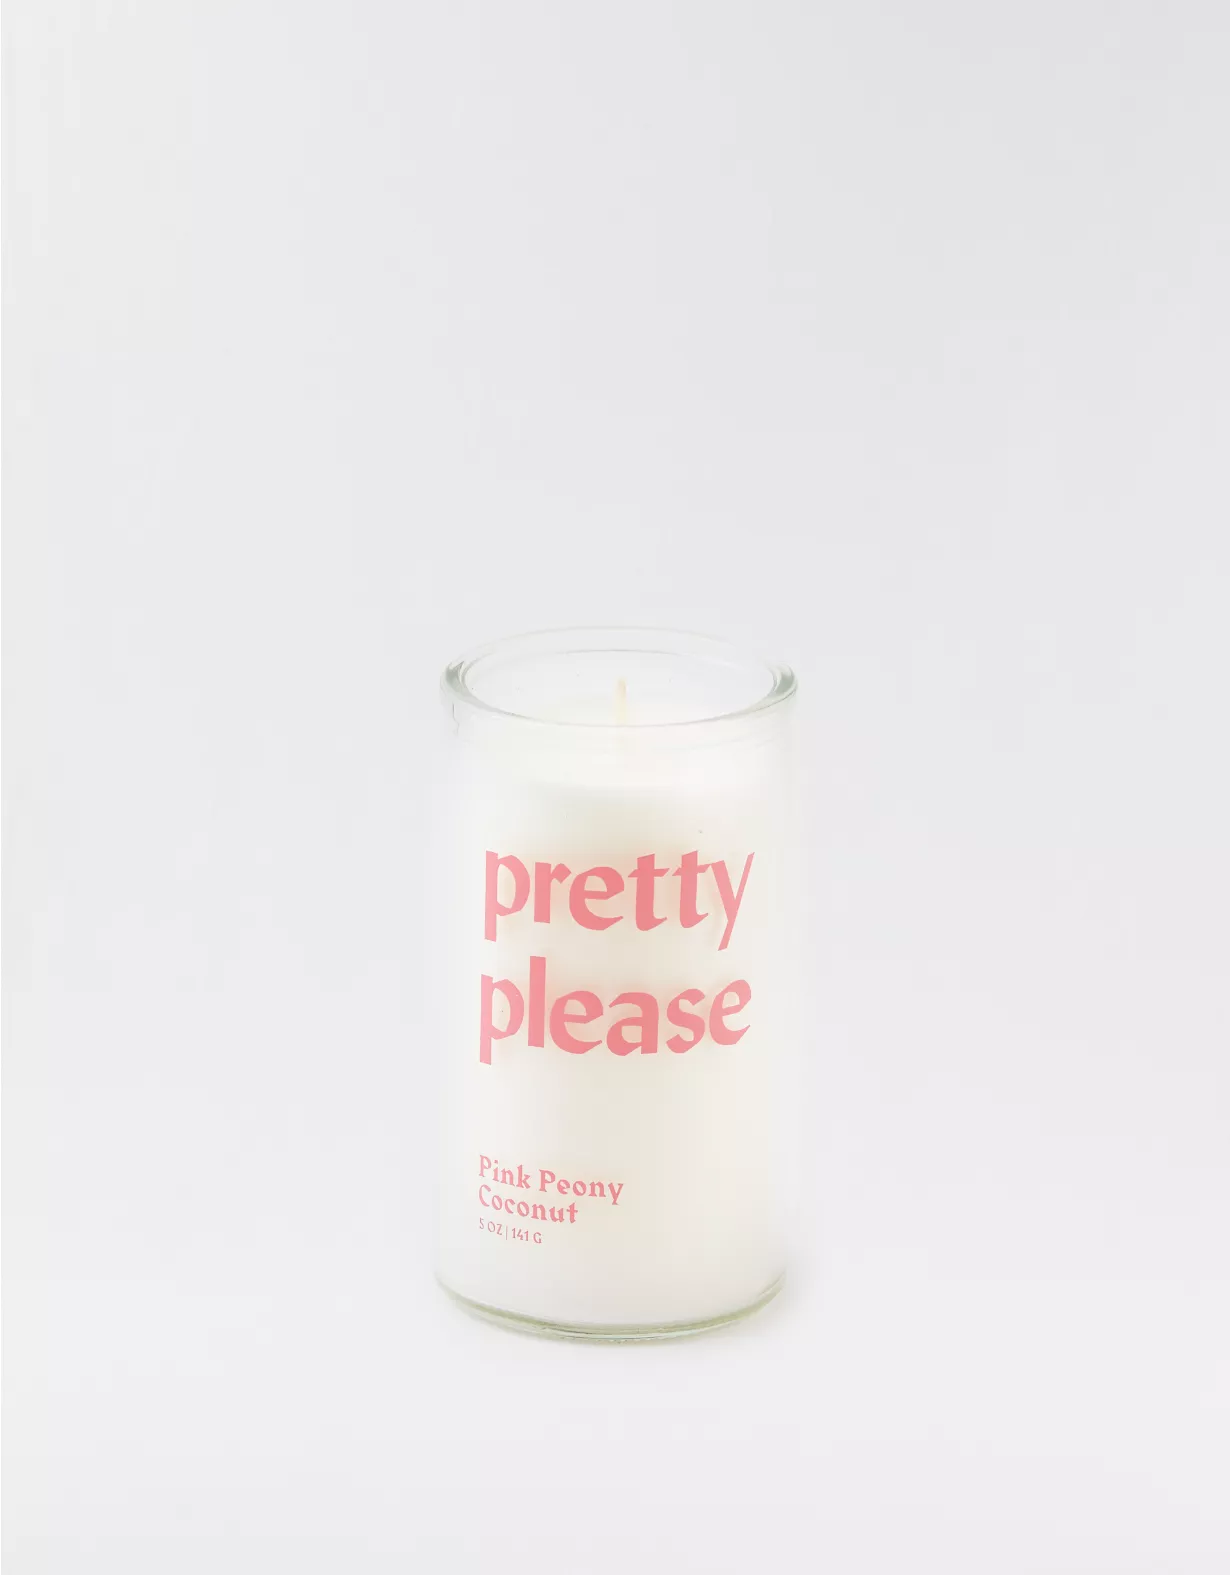 Paddywax Spark 5 OZ Candle - Pretty Please Pink Peony Coconut